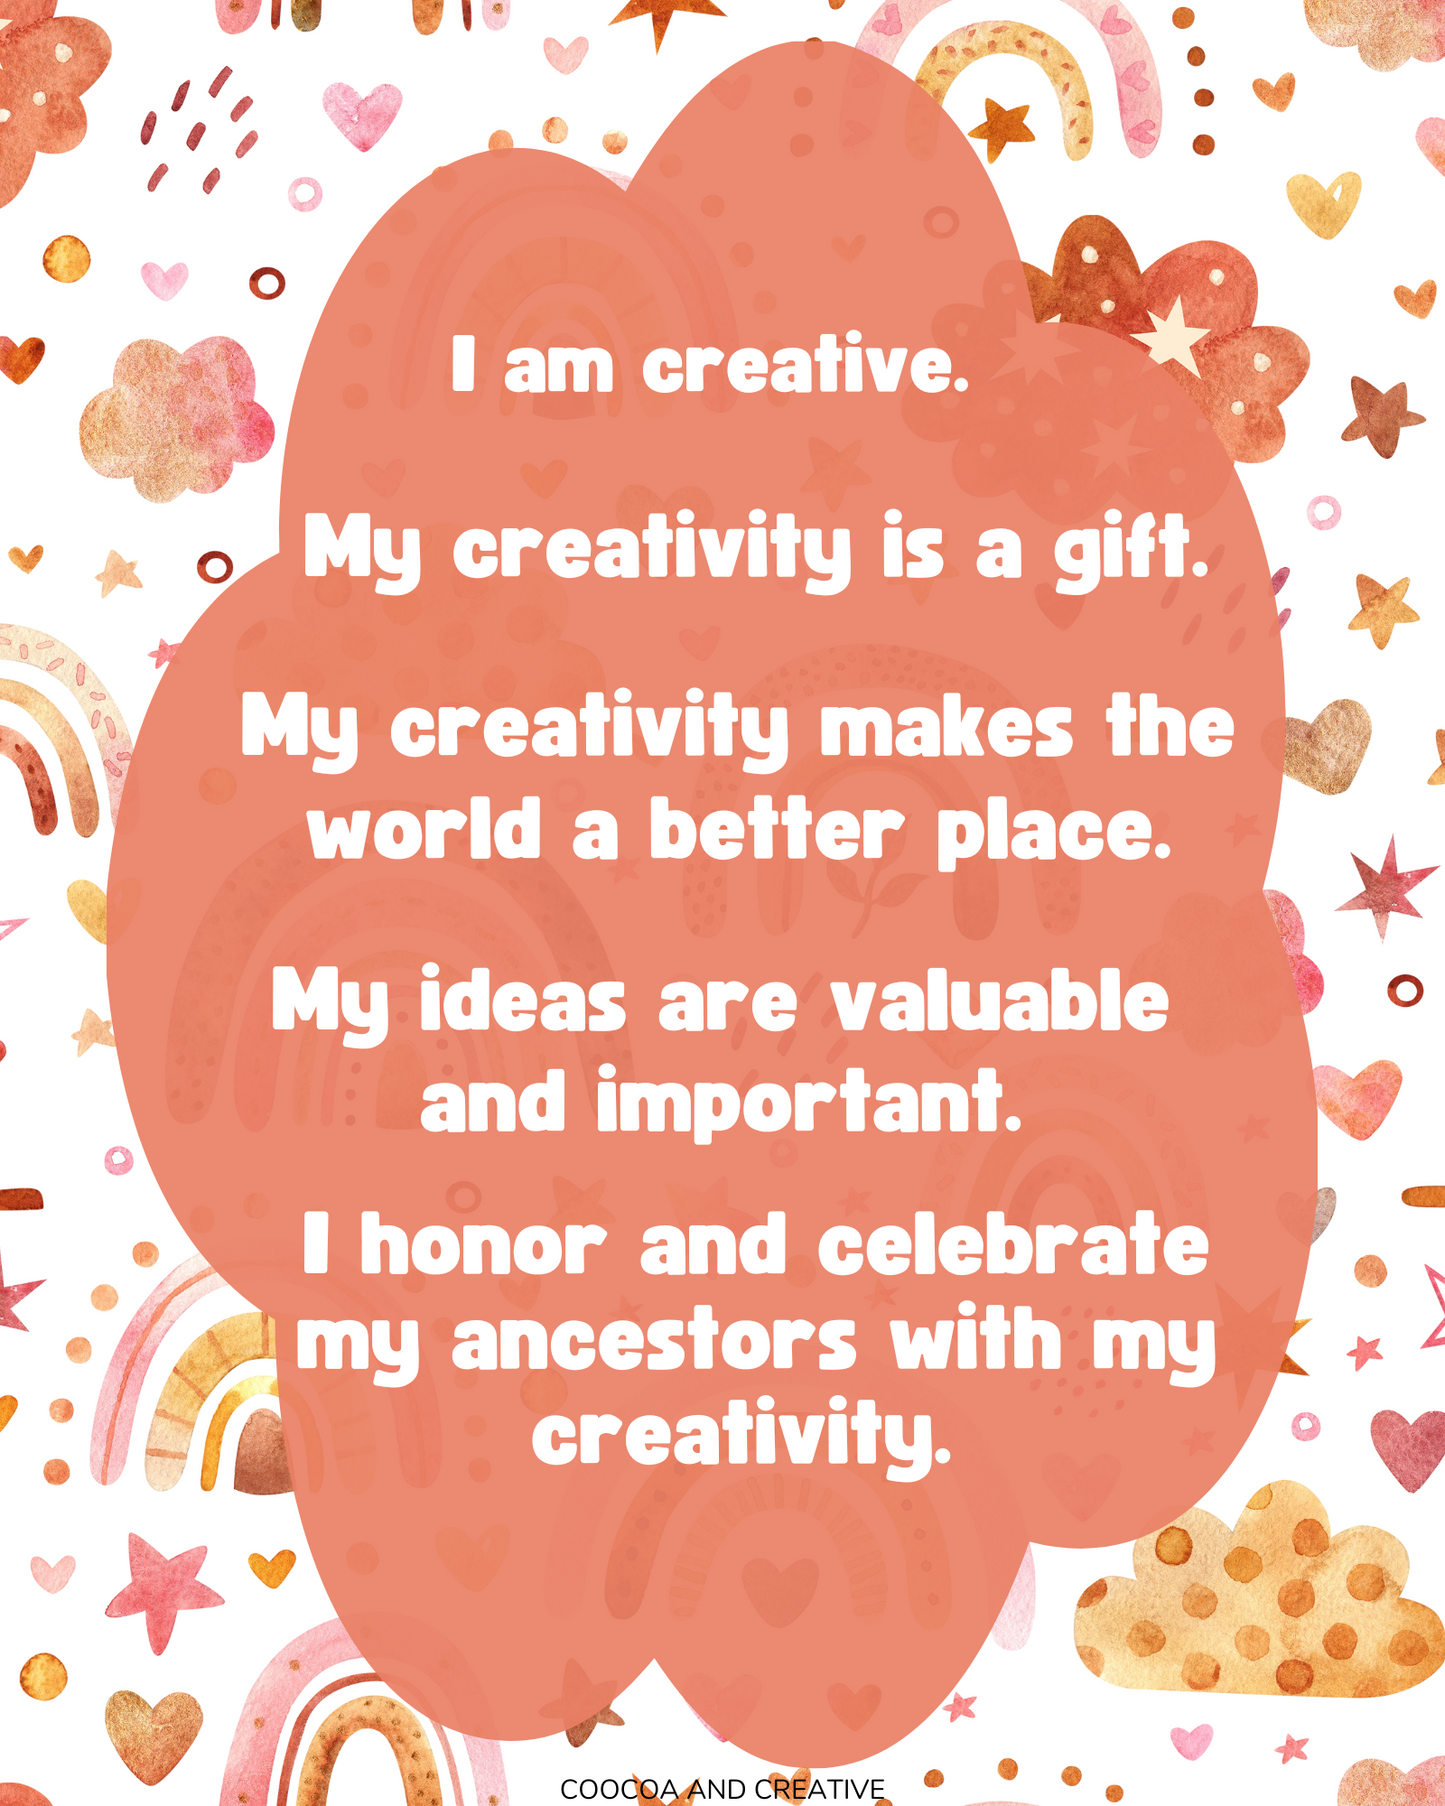 Cocoa and Creative Affirmation Posters FREEBIE